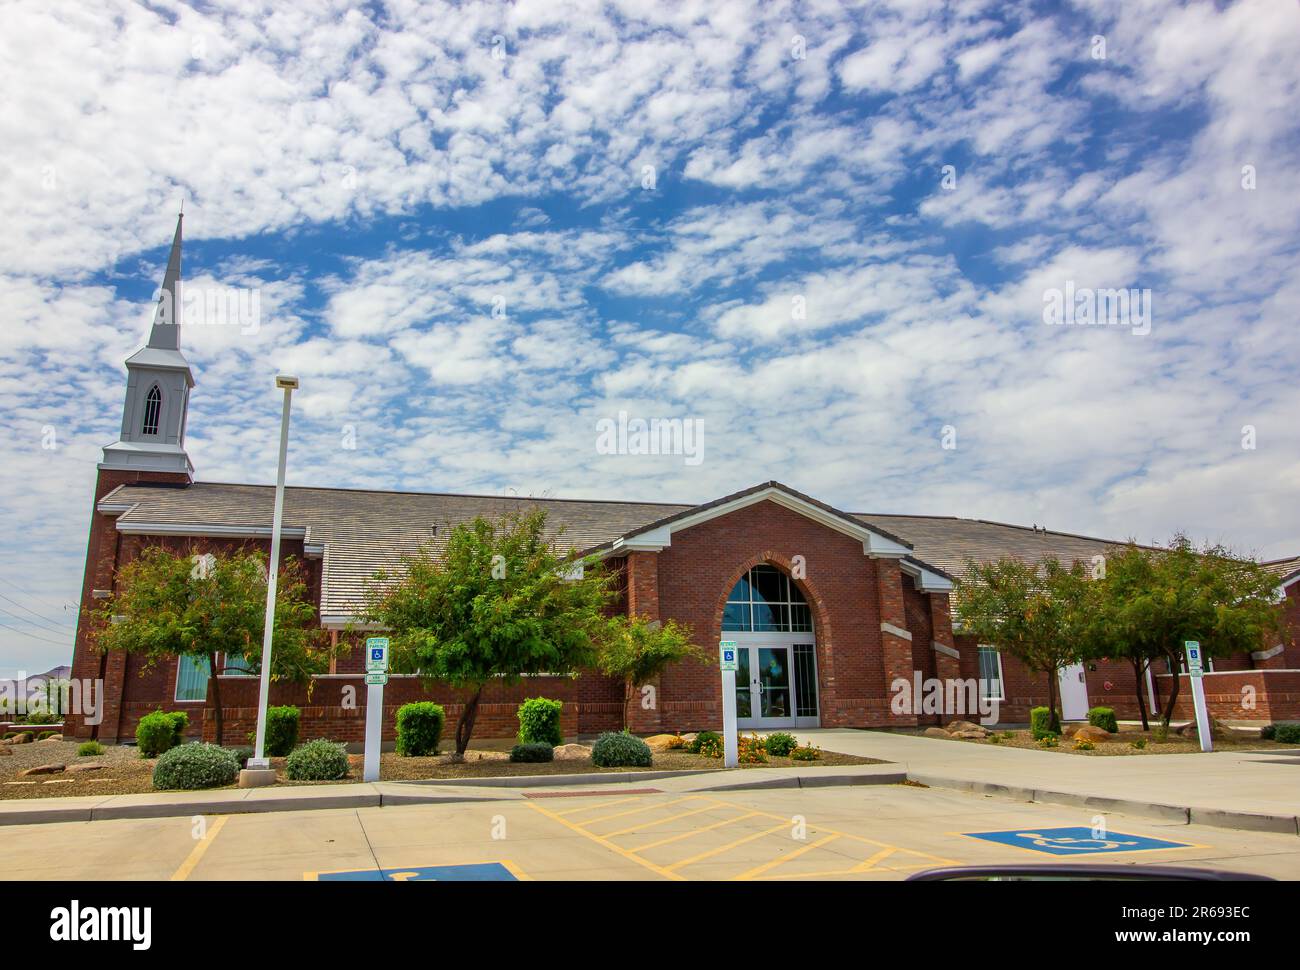 Local Brick Church With White Steeple Stock Photo